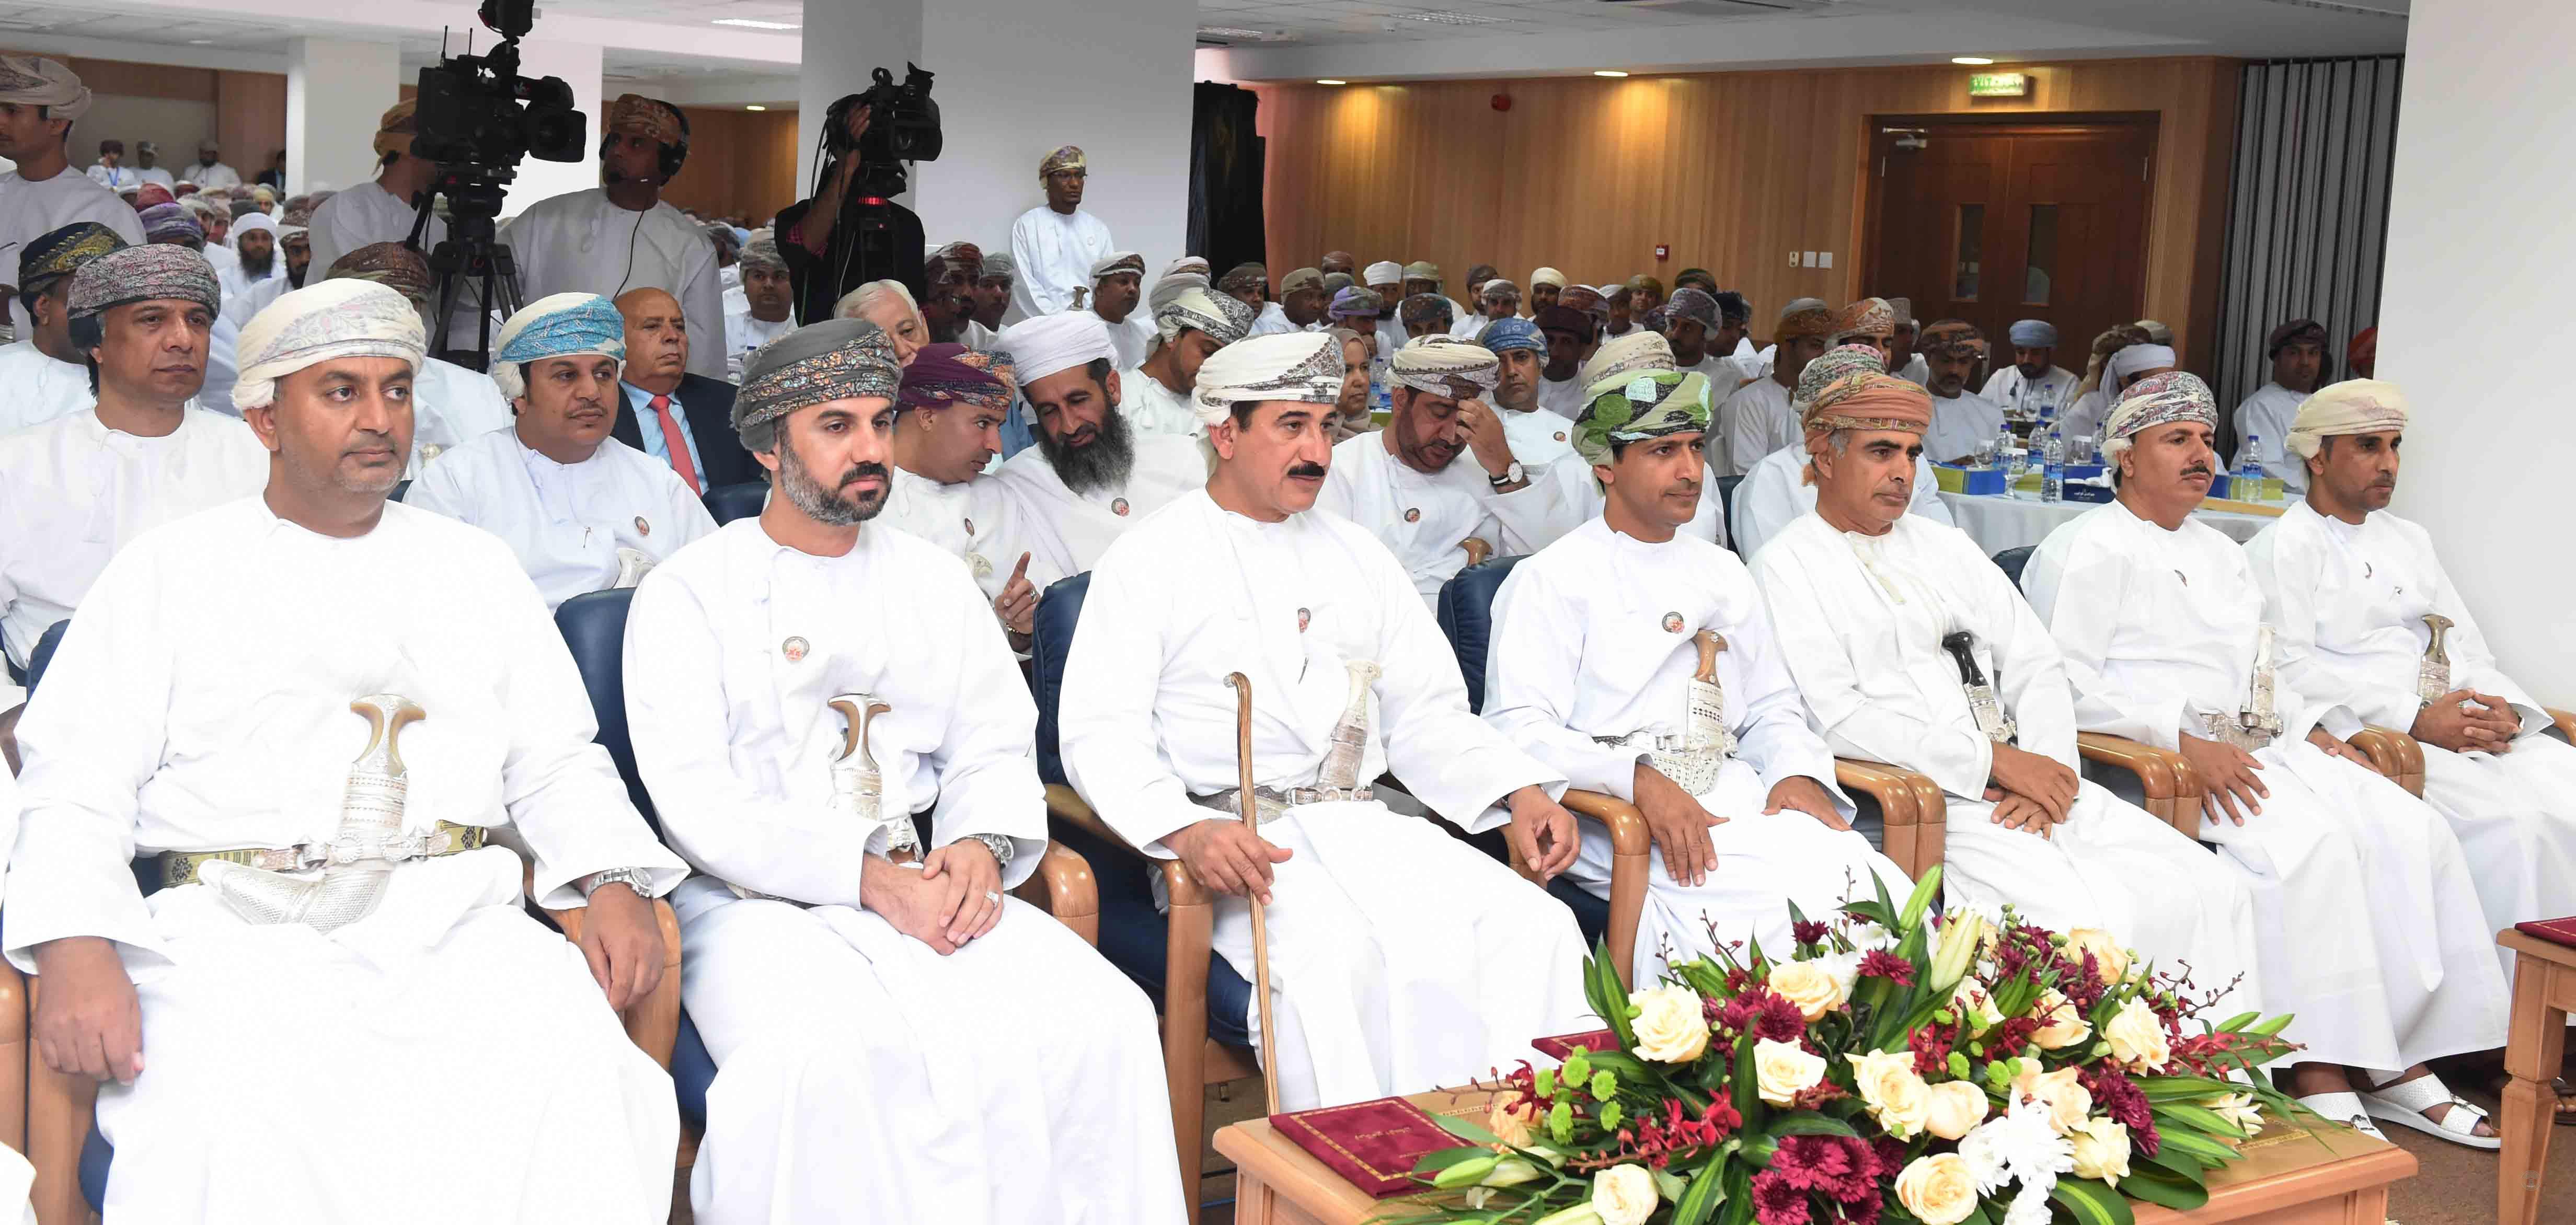 Workers’ union celebrates new headquarters in Oman